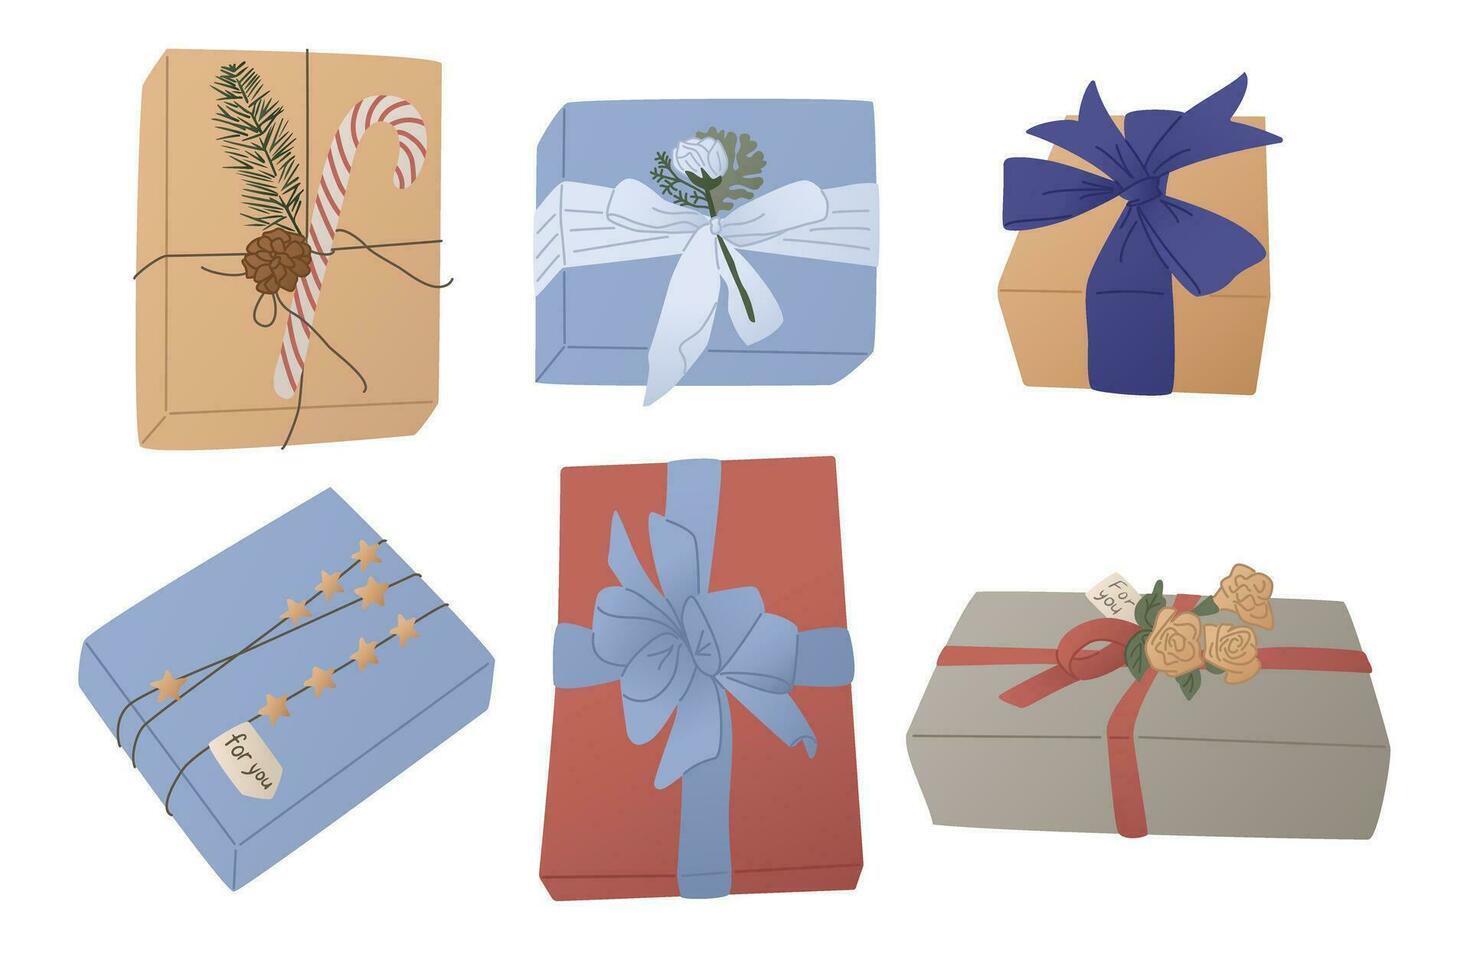 Elegant wrapped gift boxes on holidays. Modern gifts with ribbon and flowers for birthday, valentines day, anniversary, Christmas. vector